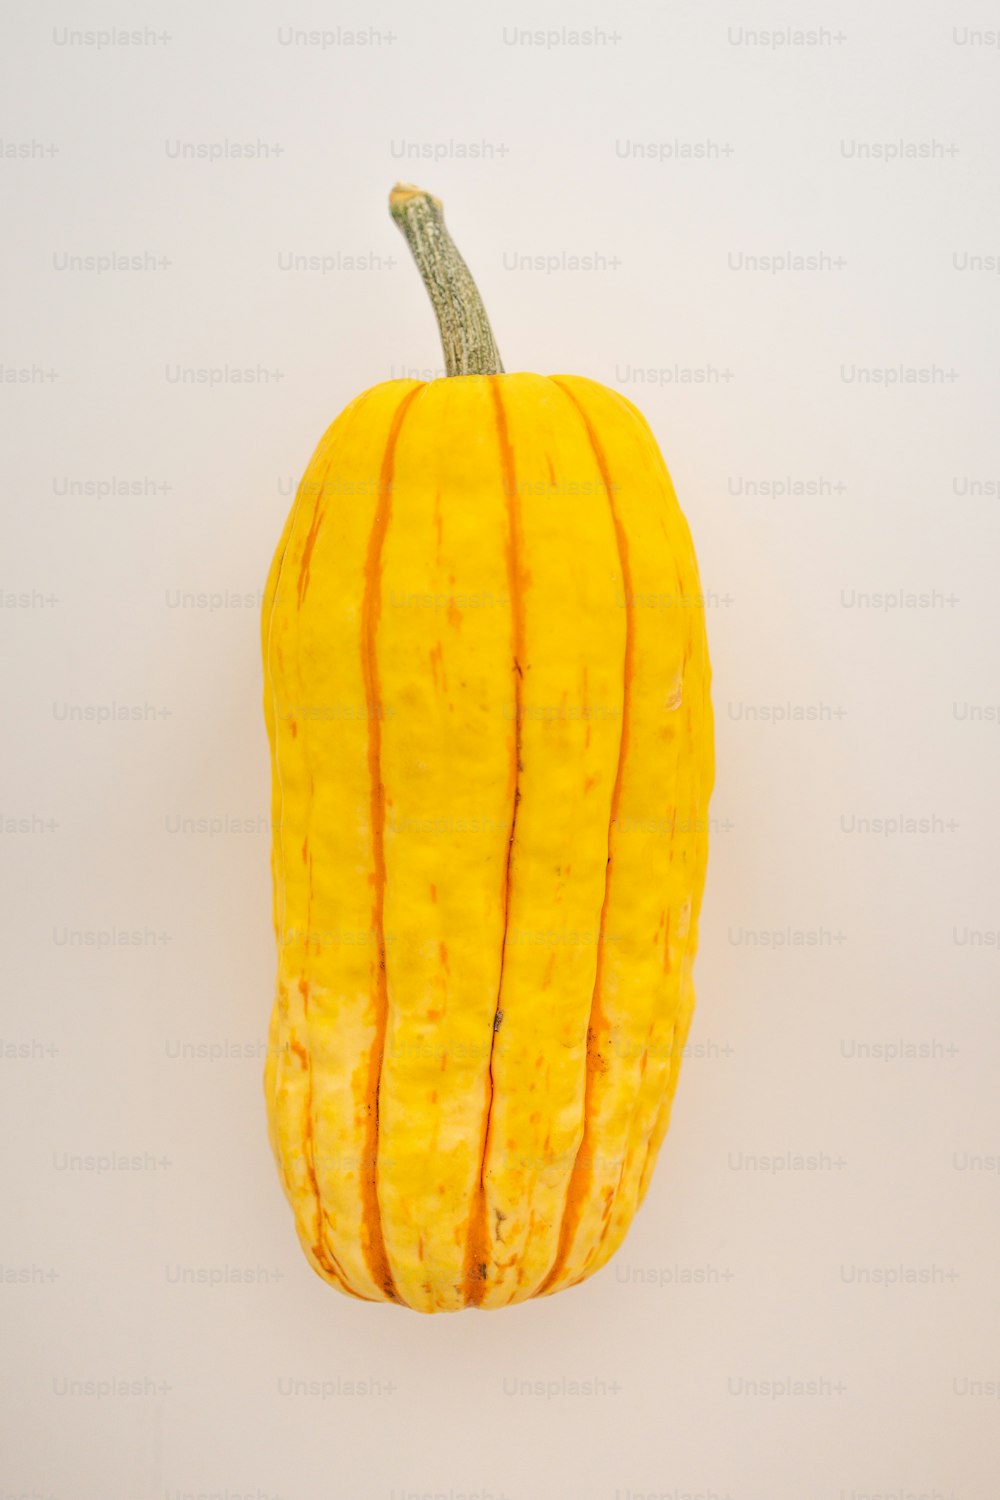 a yellow squash with a stem